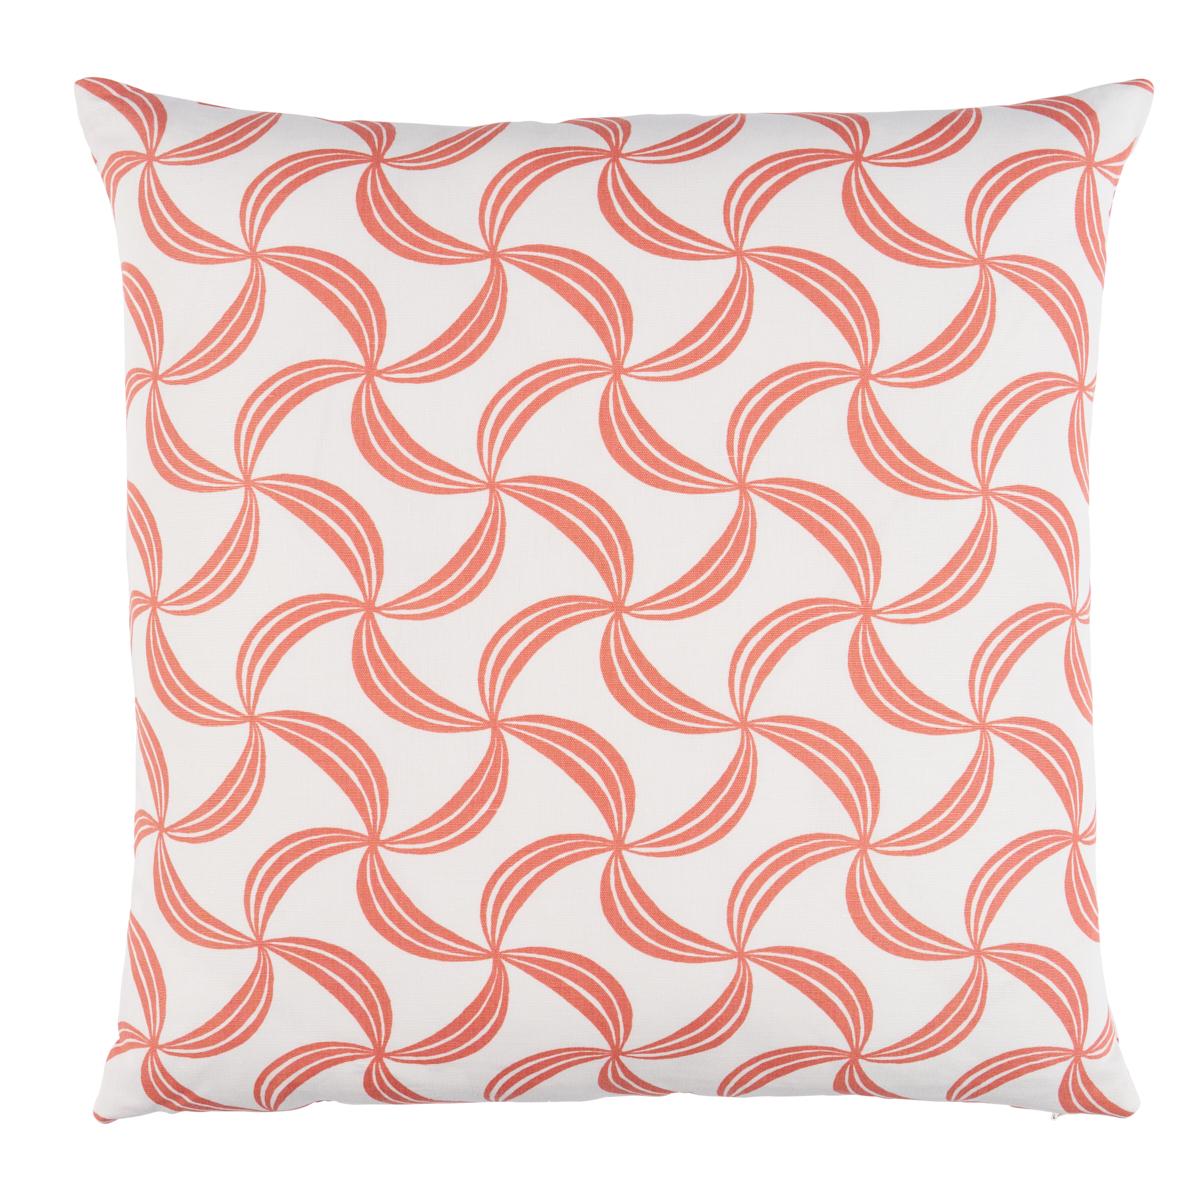 Ambrosia Pillow in Coral 20 x 20" For Sale